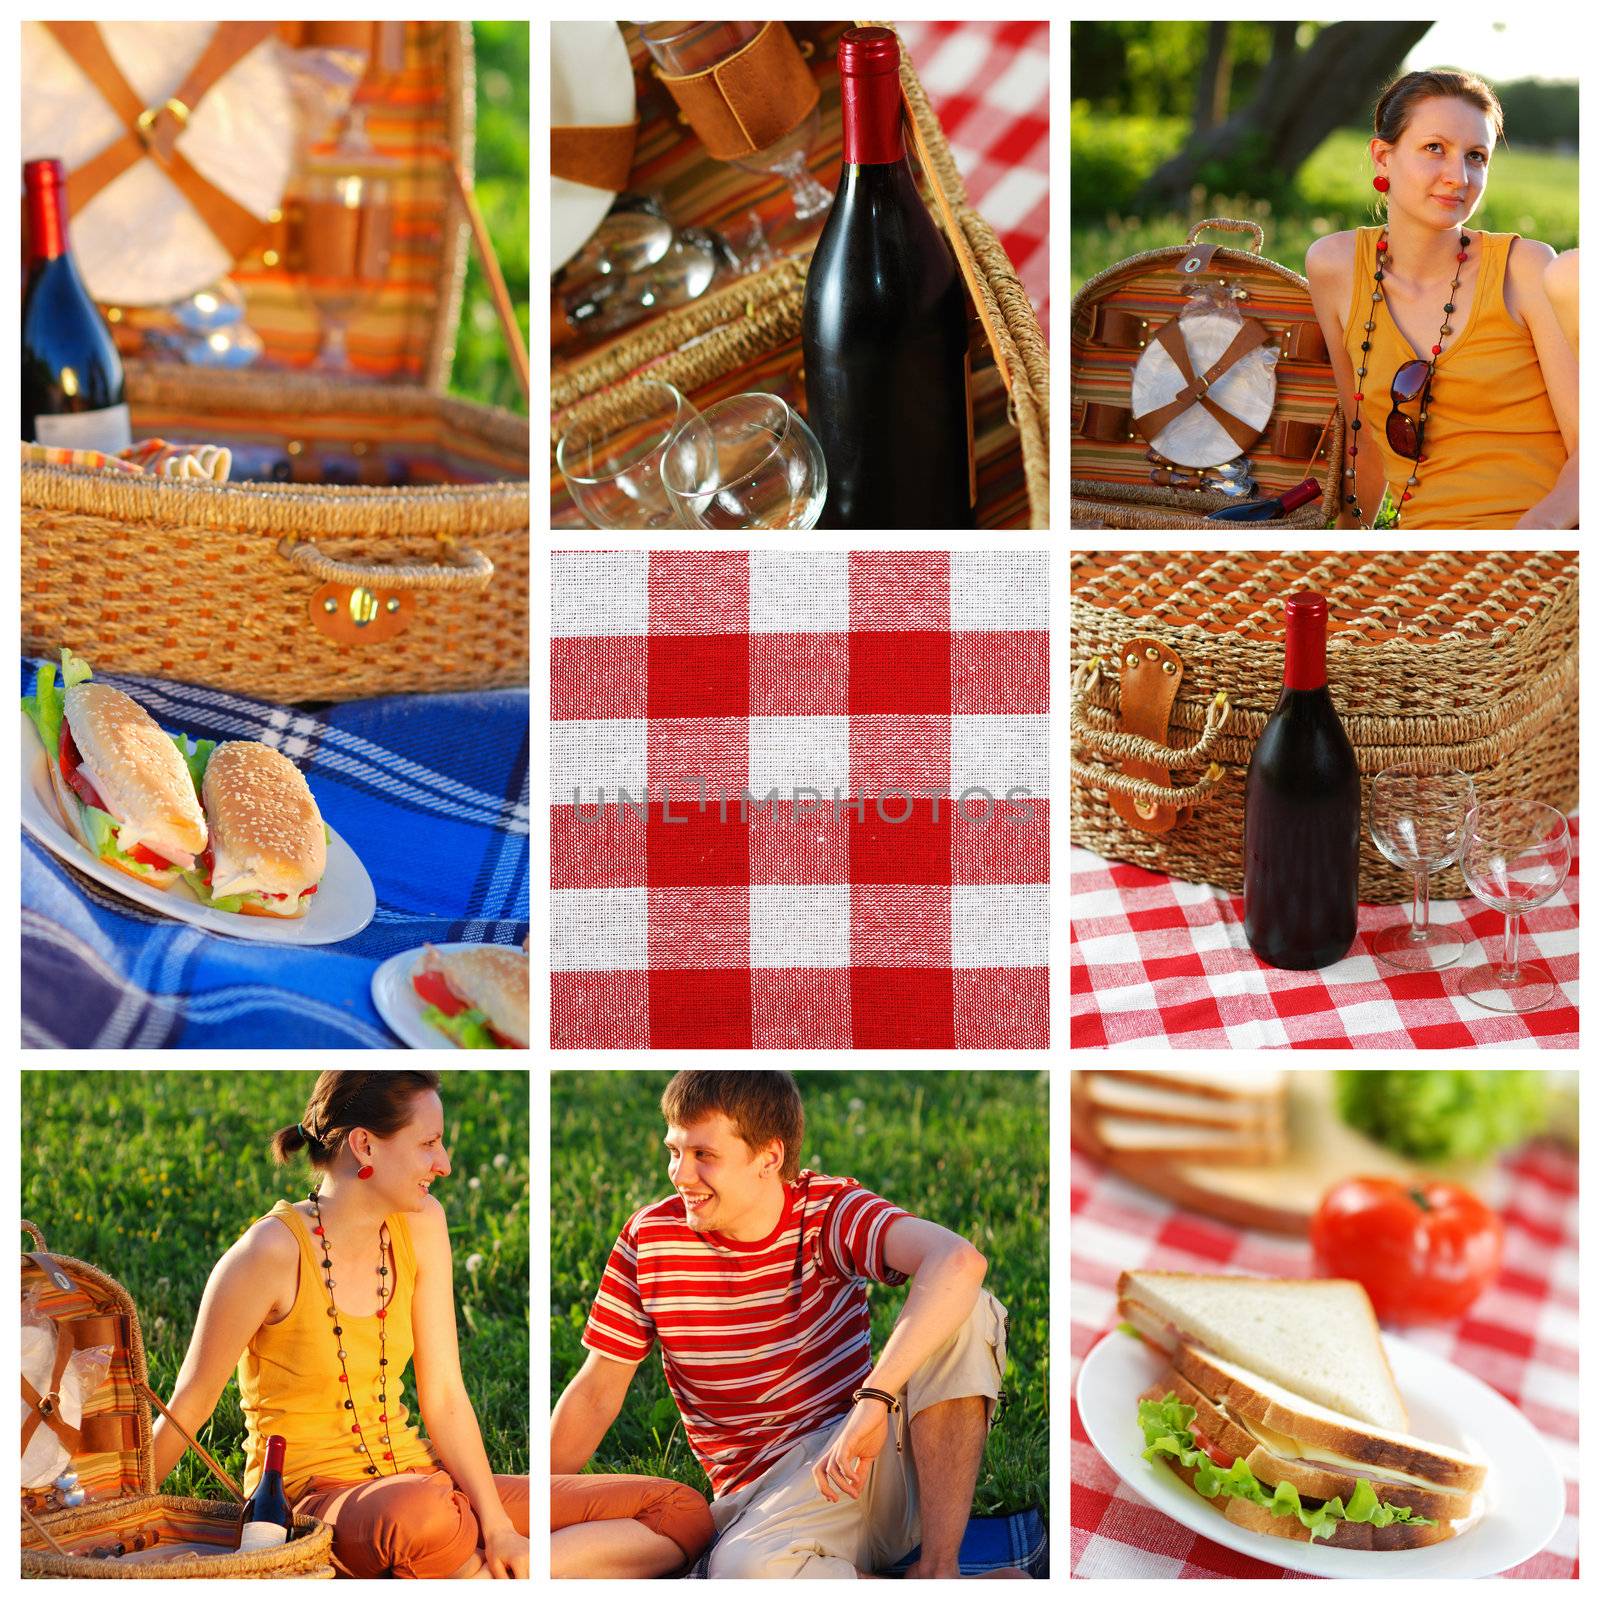 Picnic collage by haveseen